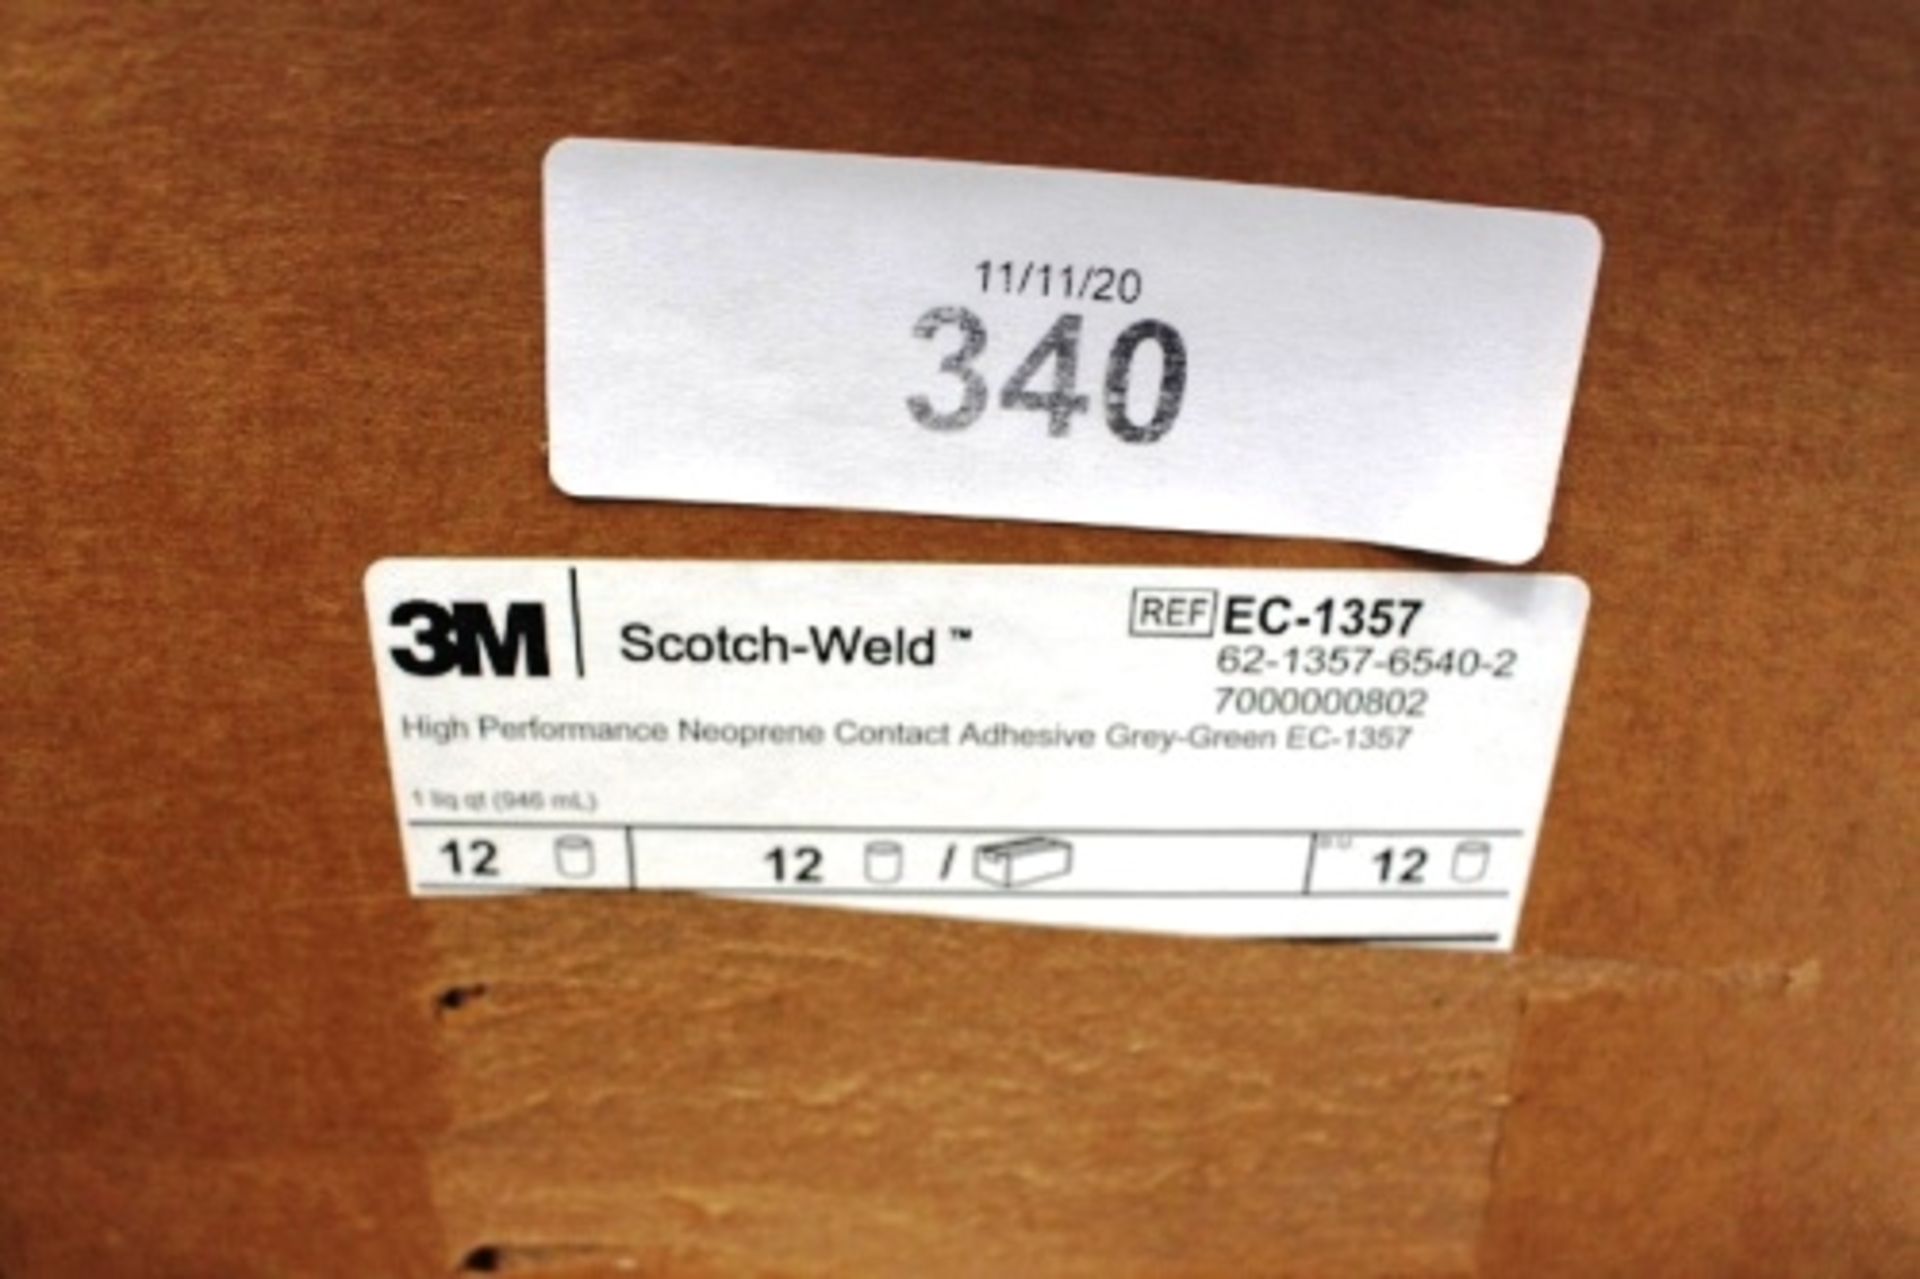 1 x 3M scotch weld high performance neoprene contact adhesive, Model EC-1357, colour grey-green - Image 5 of 5